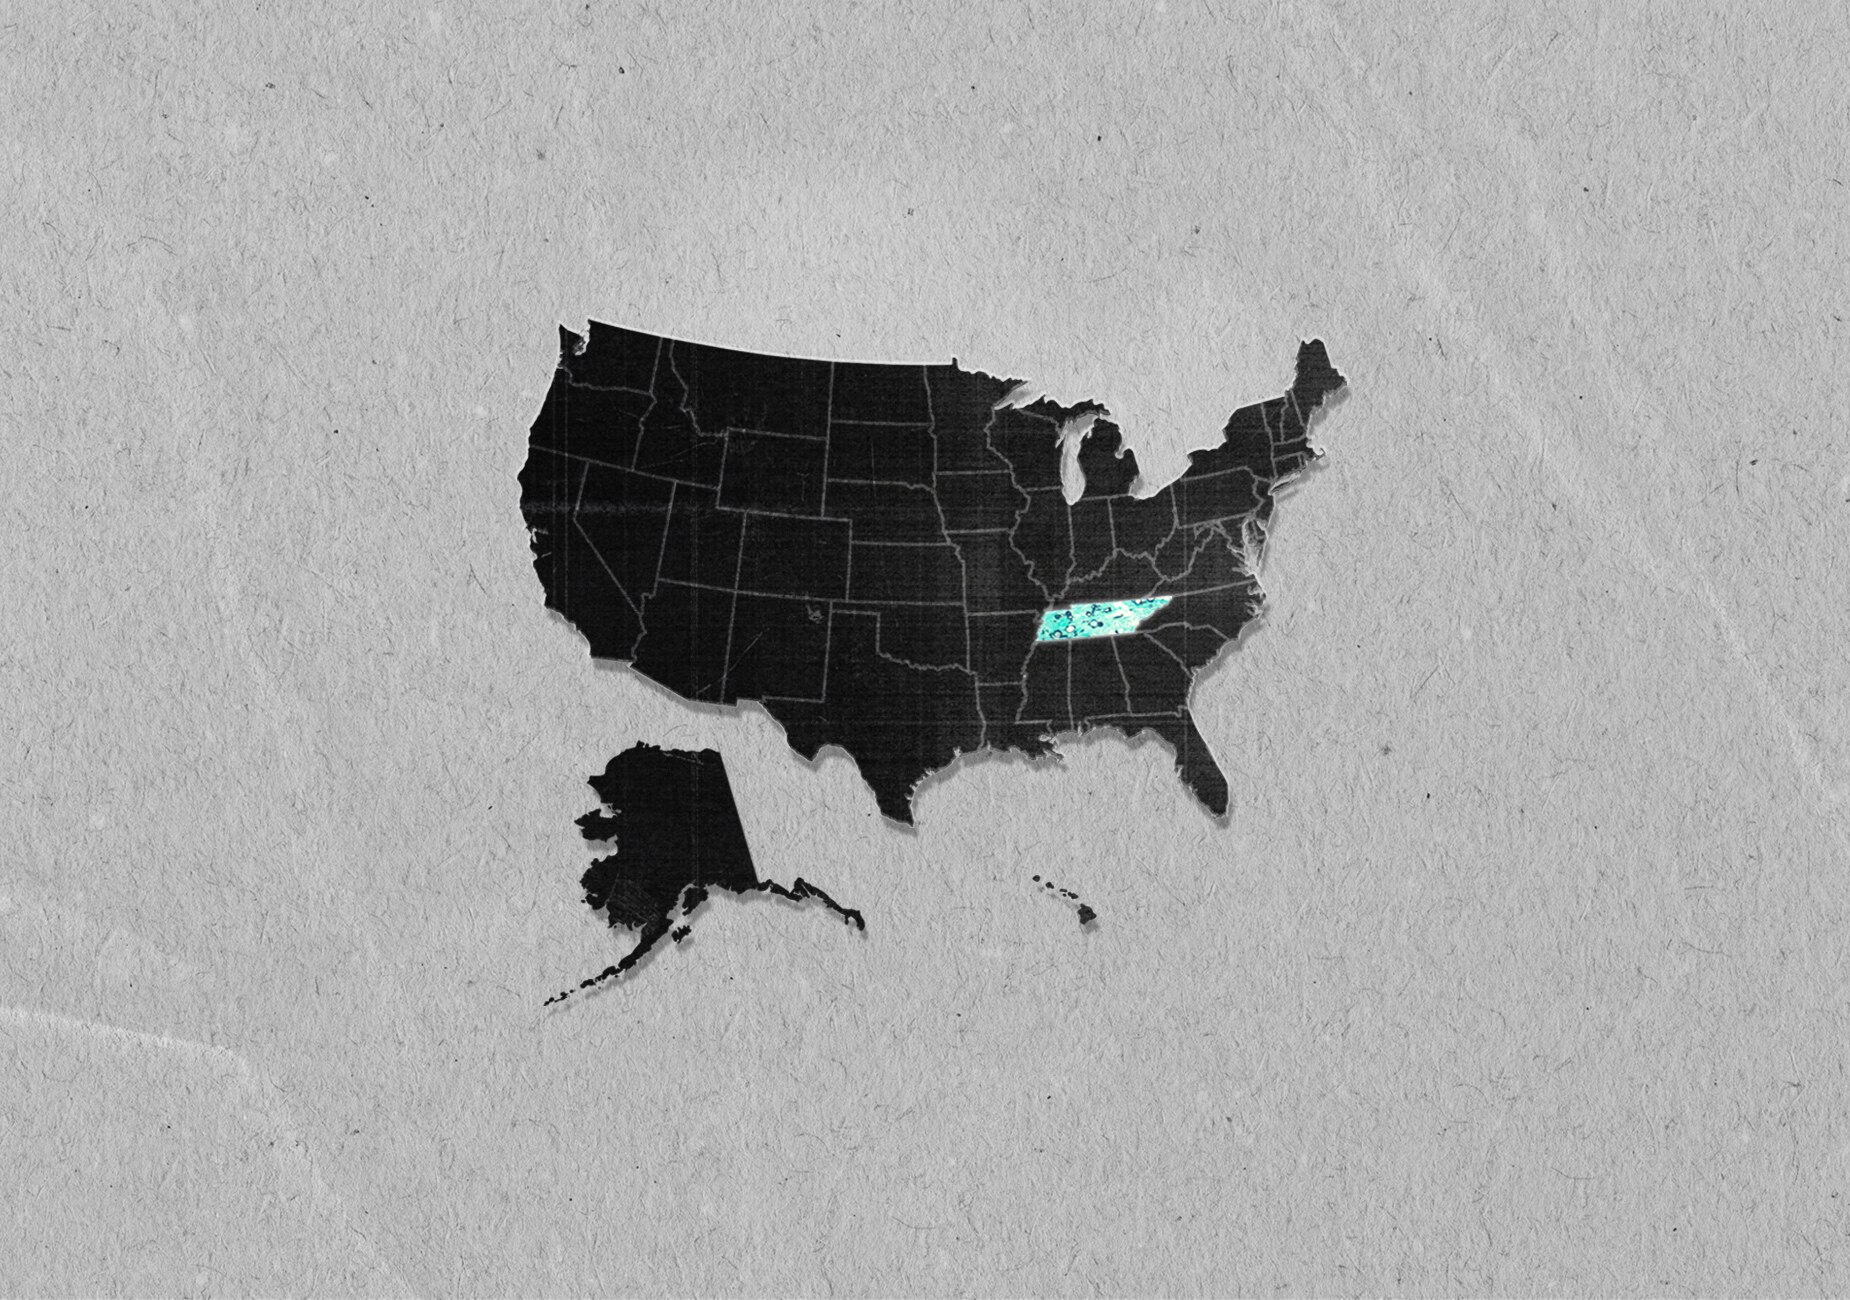 The state of Tennessee is filled in bright blue on black vector US map on grey paper background.